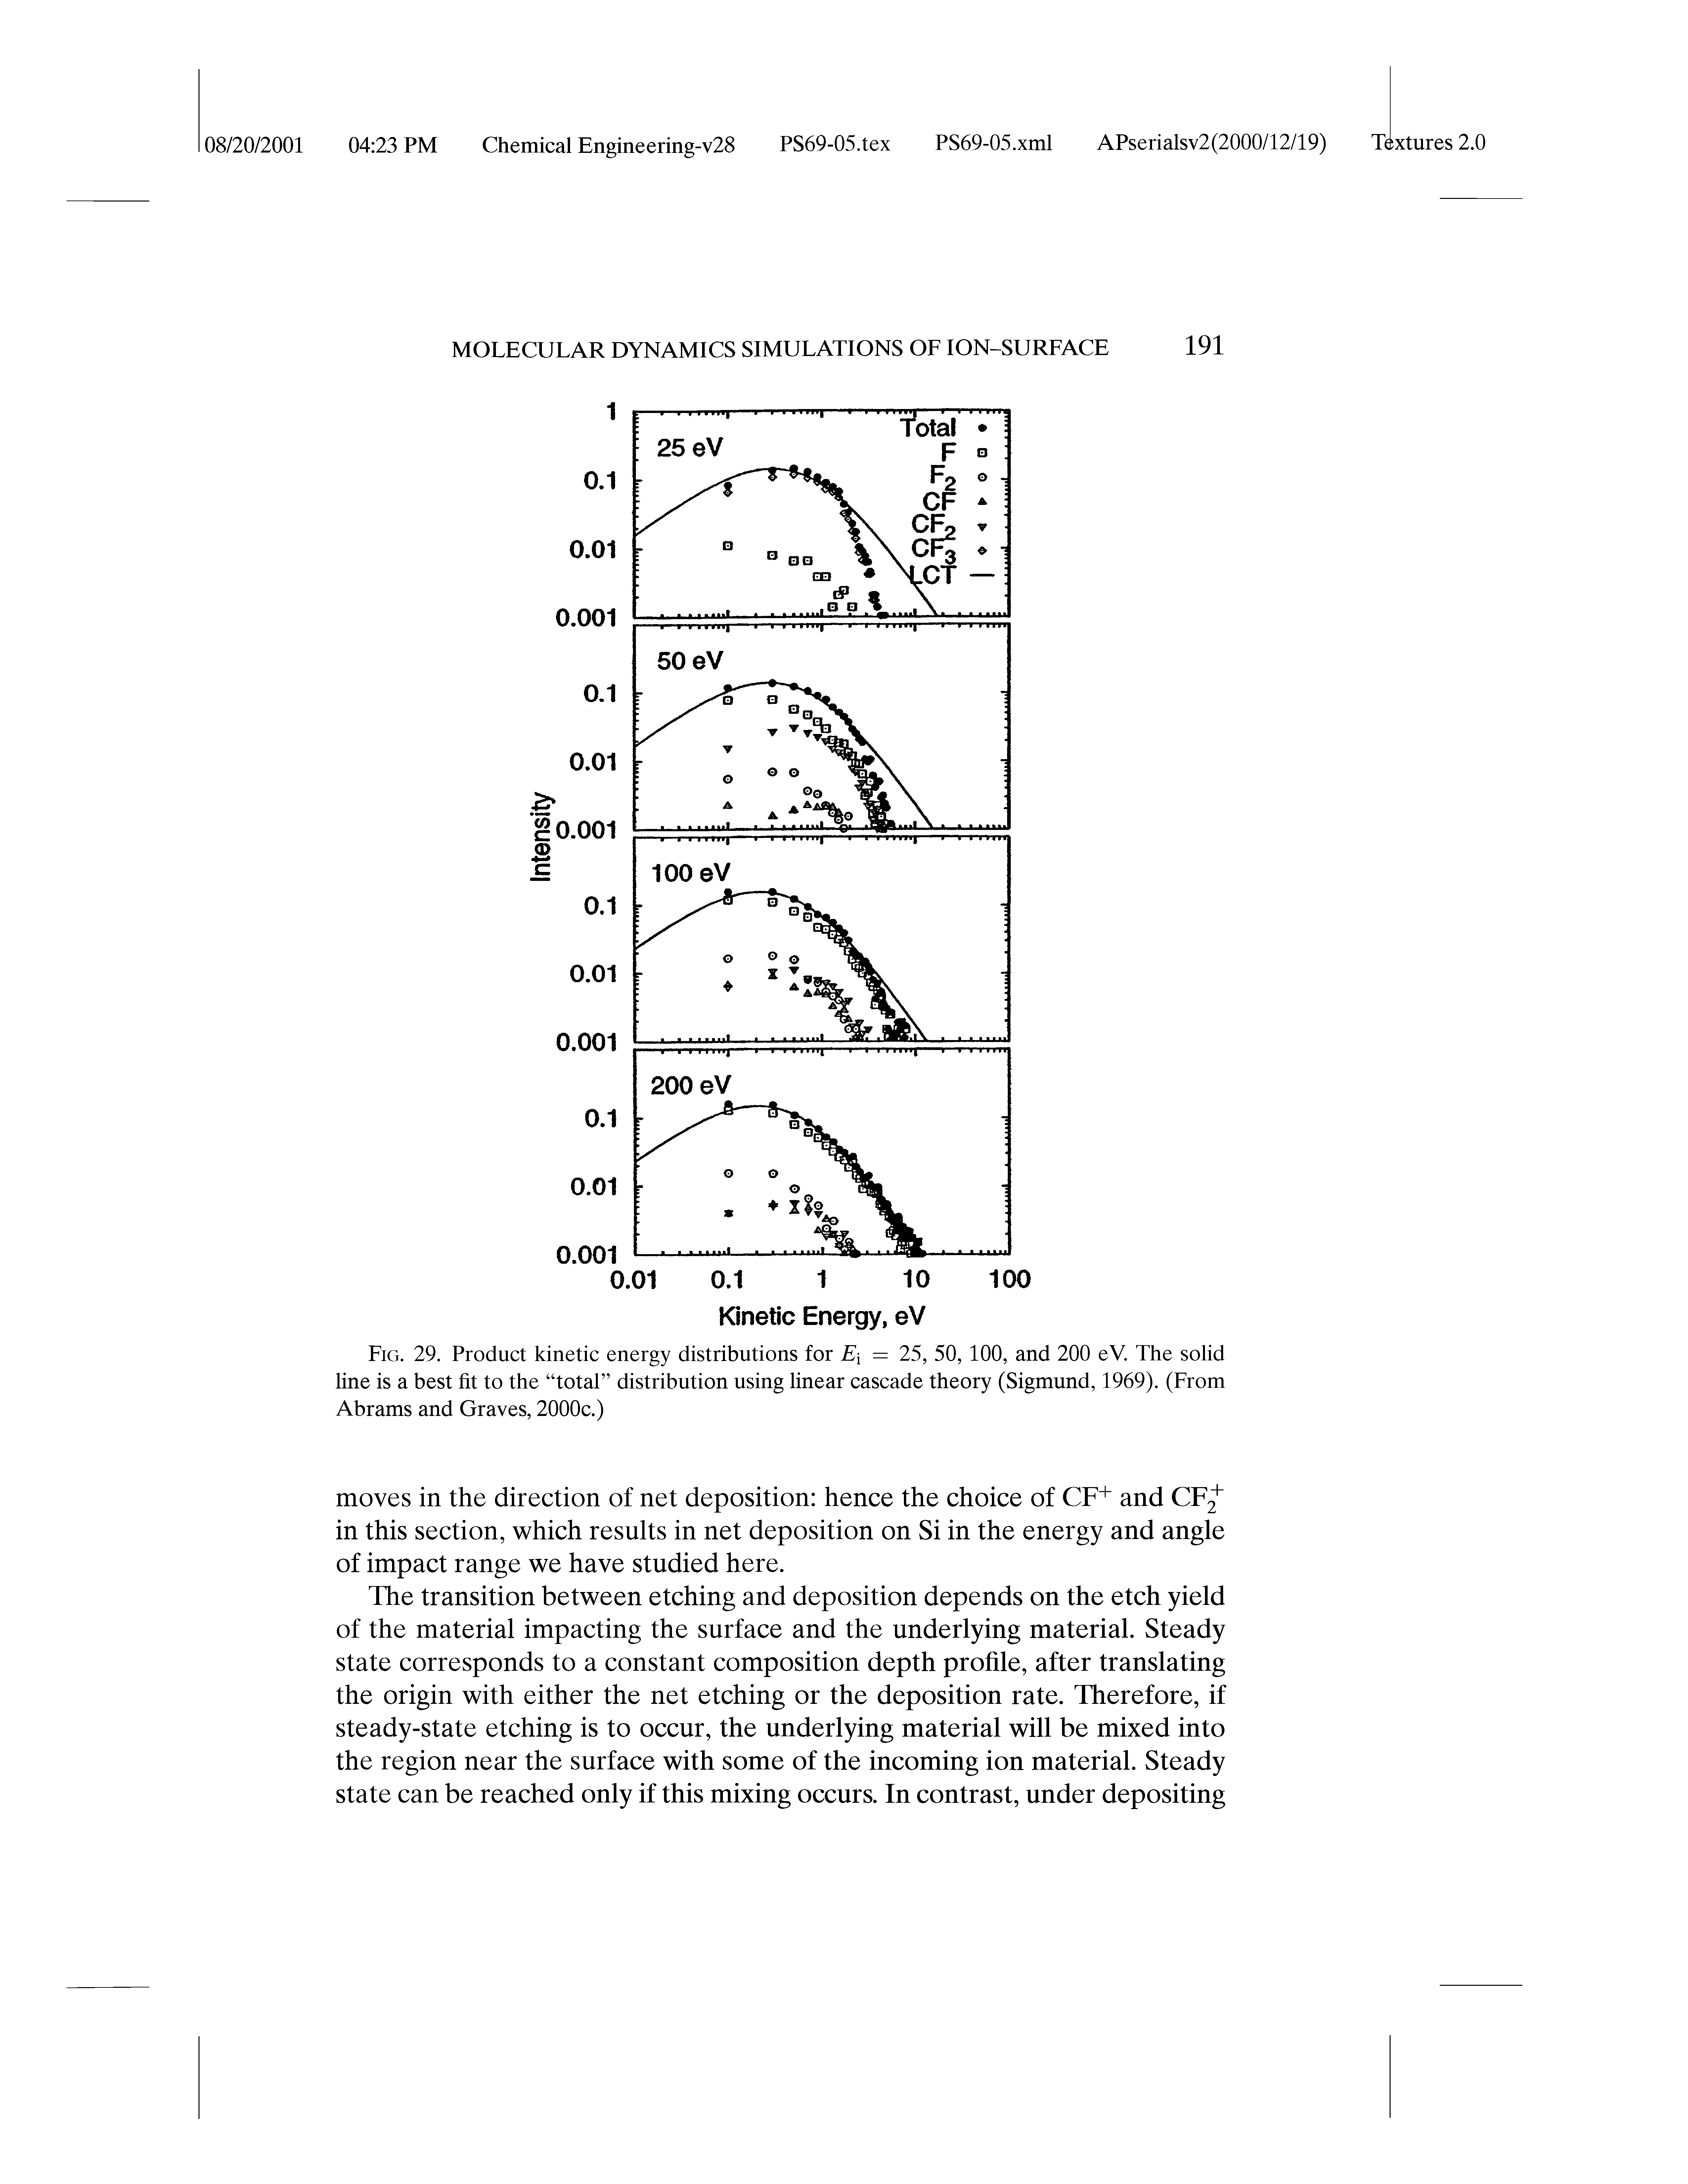 Fig. 29. Product kinetic energy distributions for E[ = 25, 50, 100, and 200 eV. The solid line is a best fit to the total distribution using linear cascade theory (Sigmund, 1969). (From Abrams and Graves, 2000c.)...